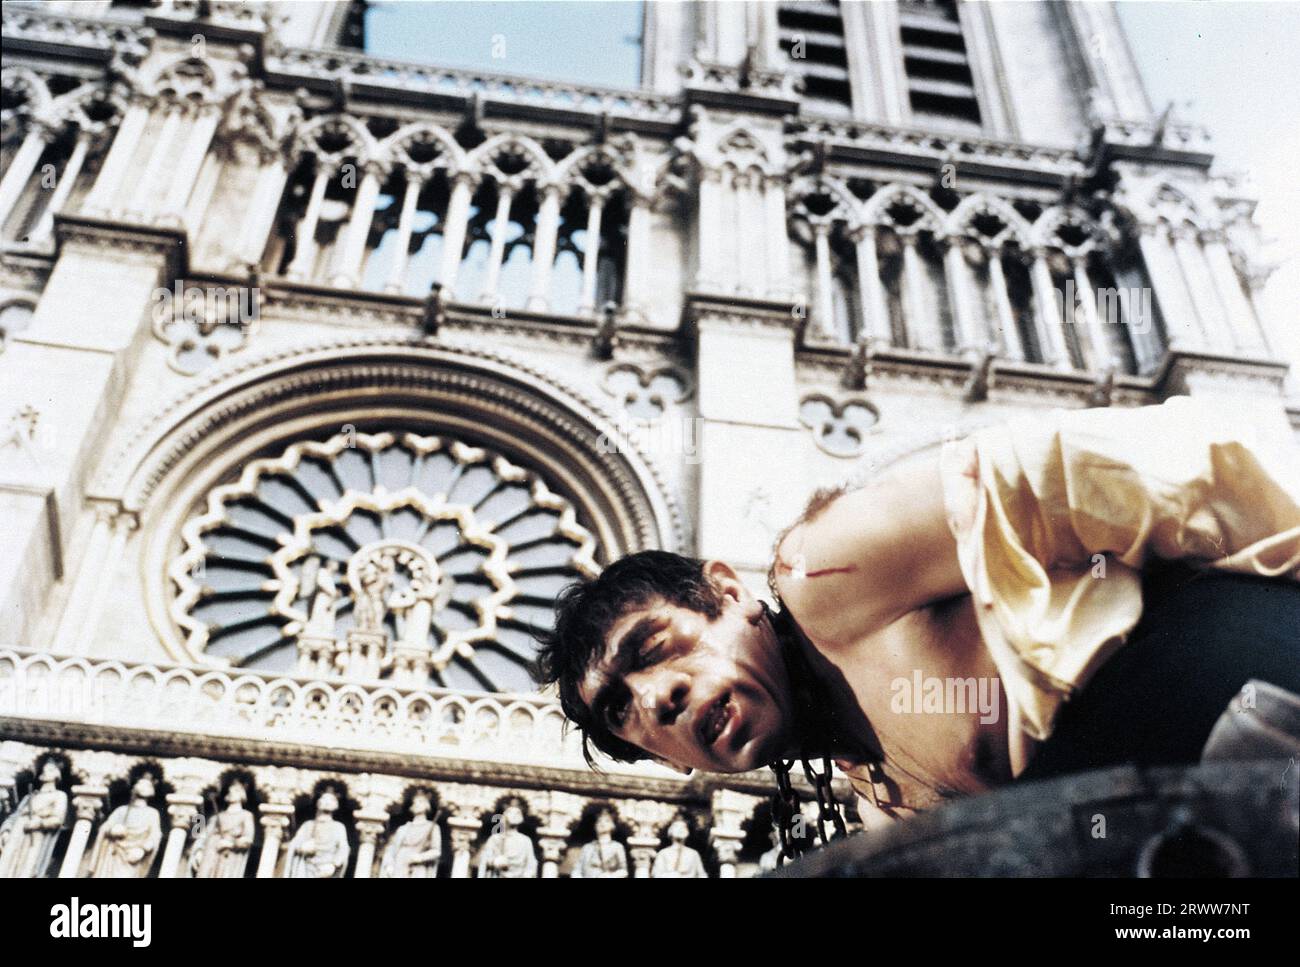 ANTHONY QUINN in THE HUNCHBACK OF NOTRE DAME (1956) -Original title: NOTRE DAME DE PARIS-, directed by JEAN DELANNOY. Credit: PARIS-FILM PRODUCTIONS/ALLIED ARTISTS / Album Stock Photo